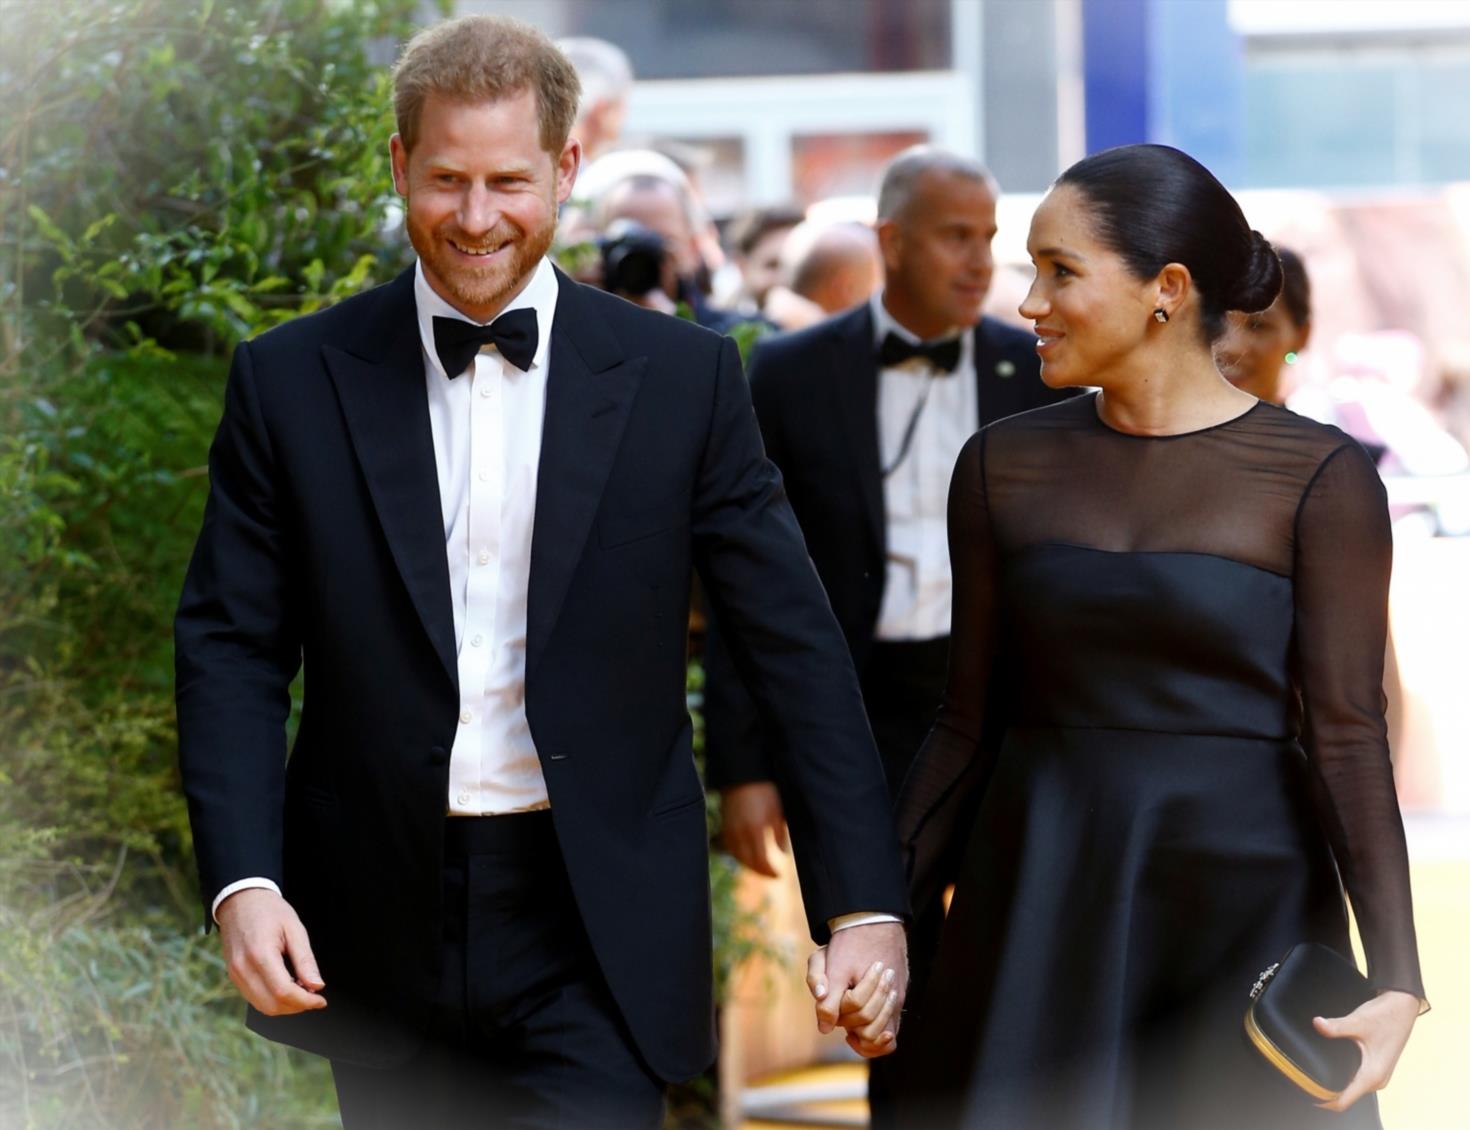 Prince Harry and Meghan Markles Coronation Decisions Were Long KnownAdGUcXbs 7